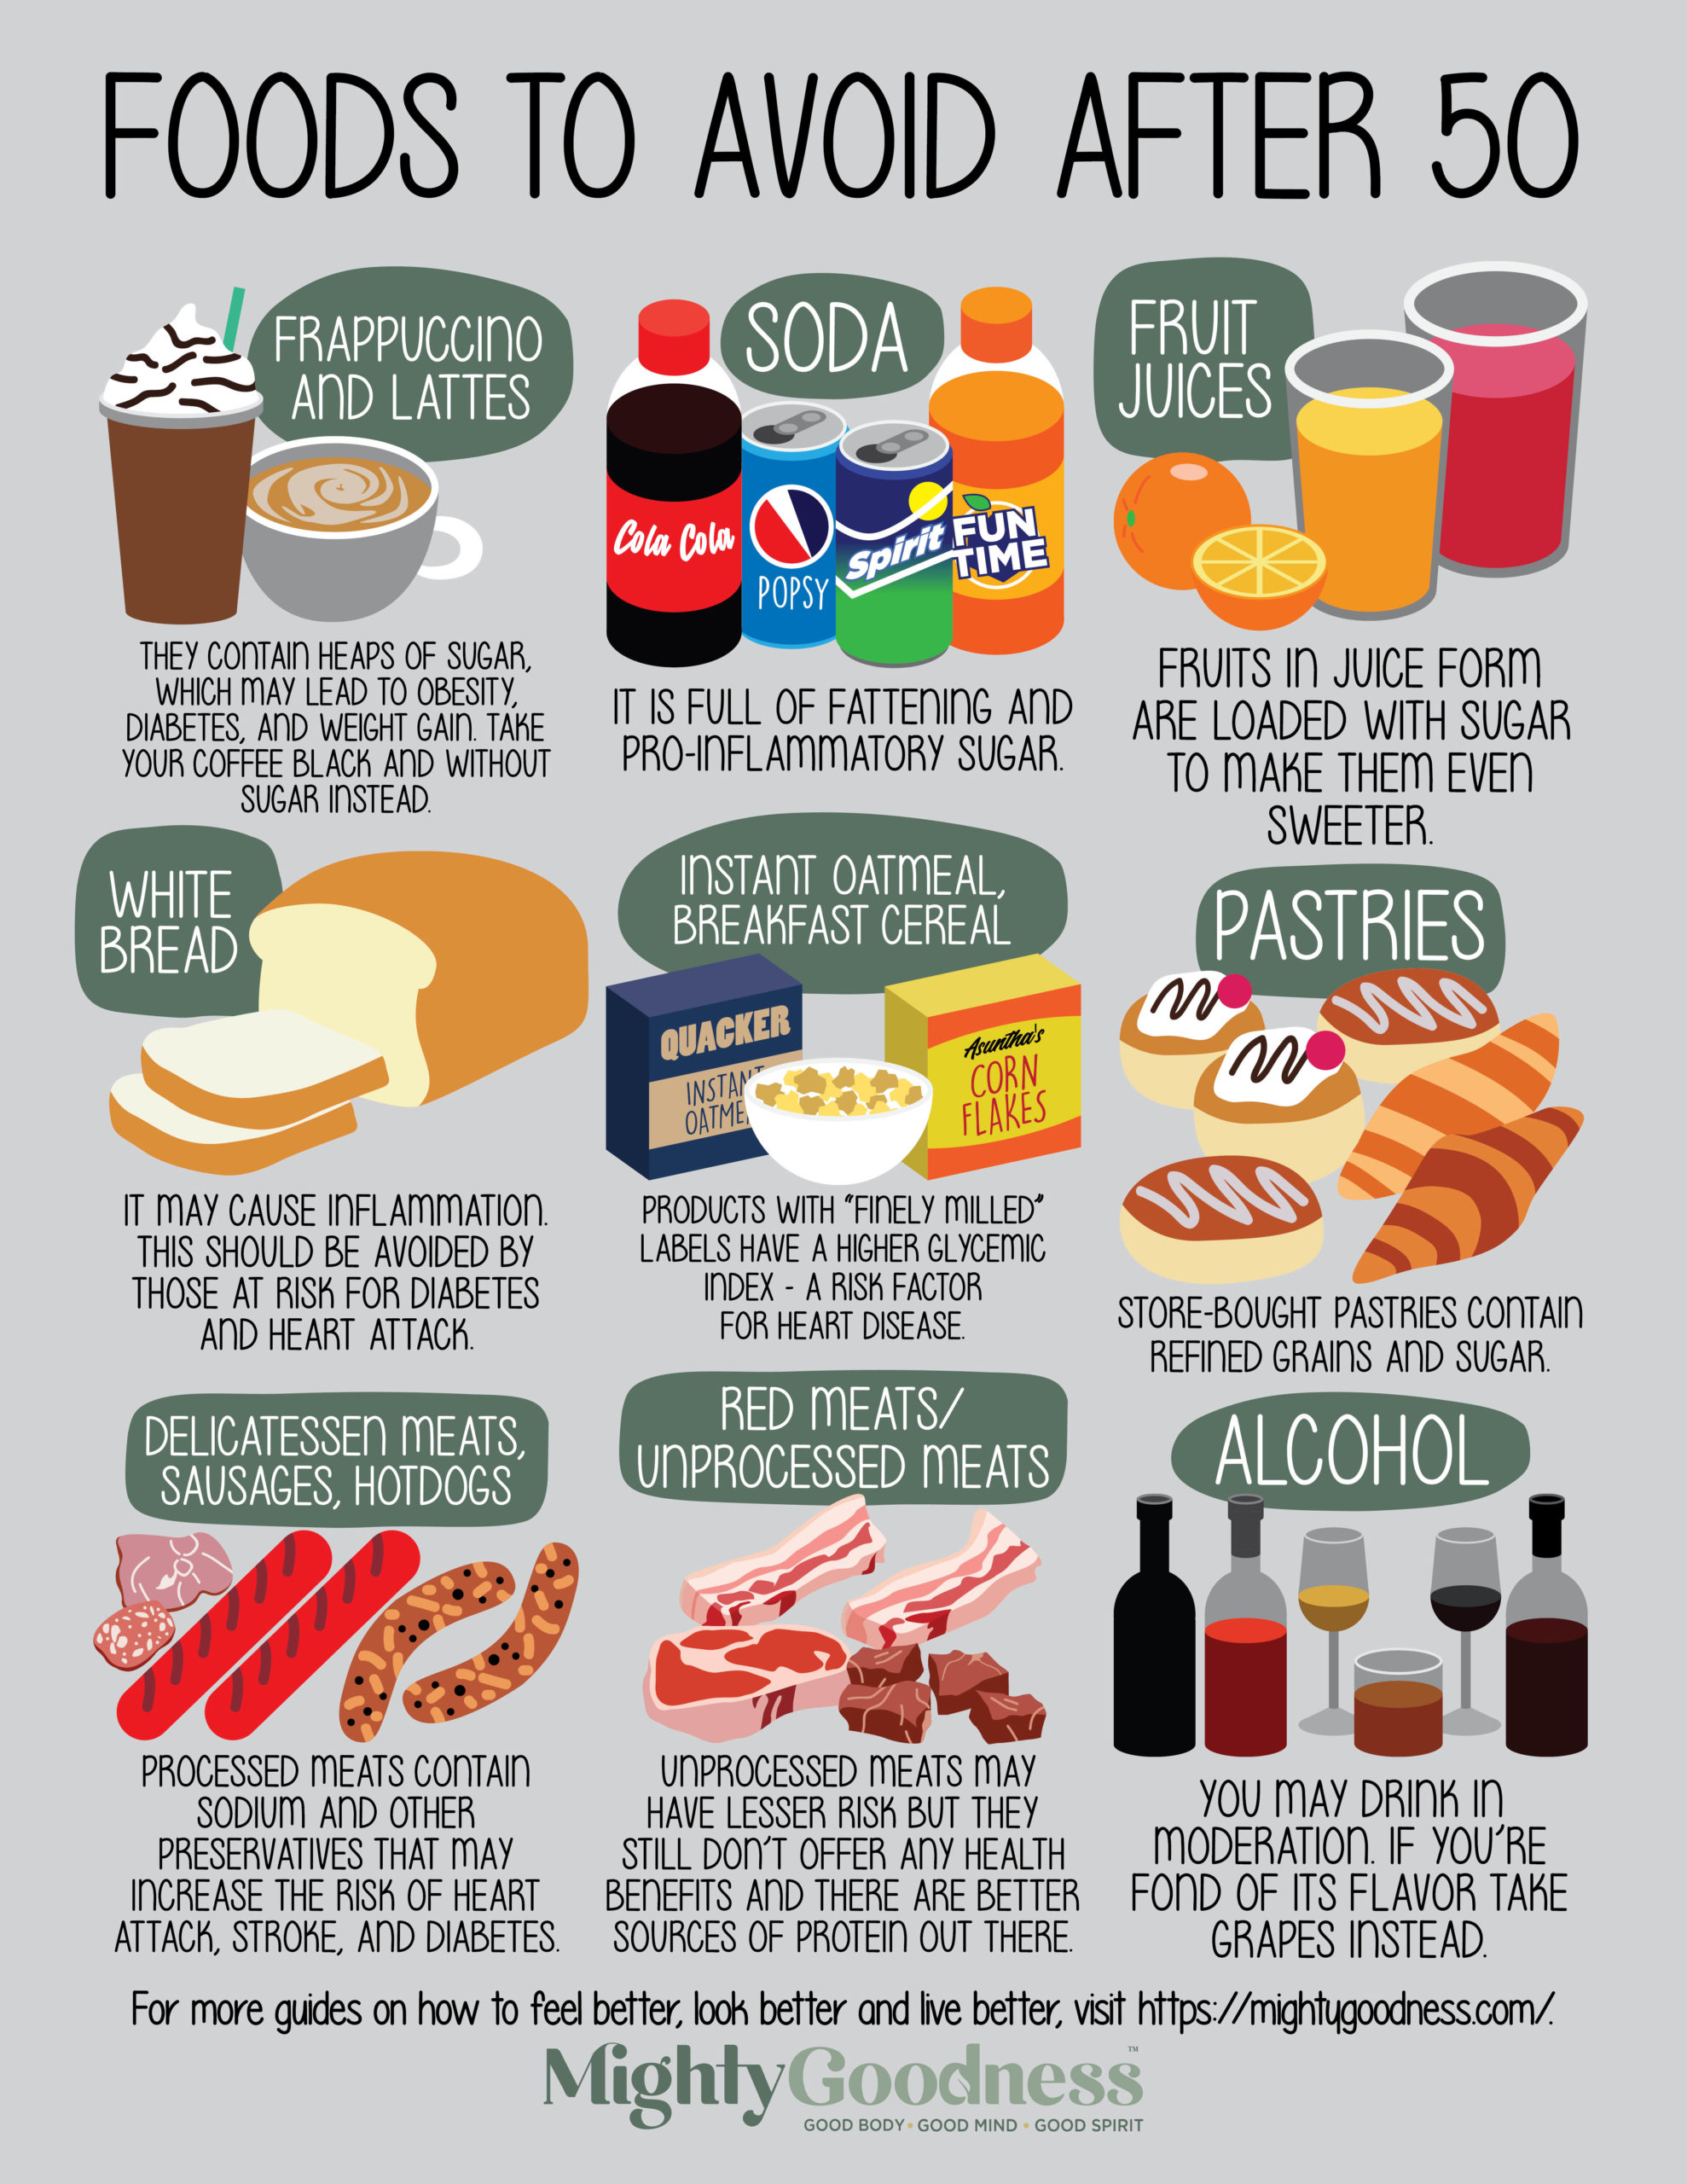 Foods to Avoid After 50 edit 3